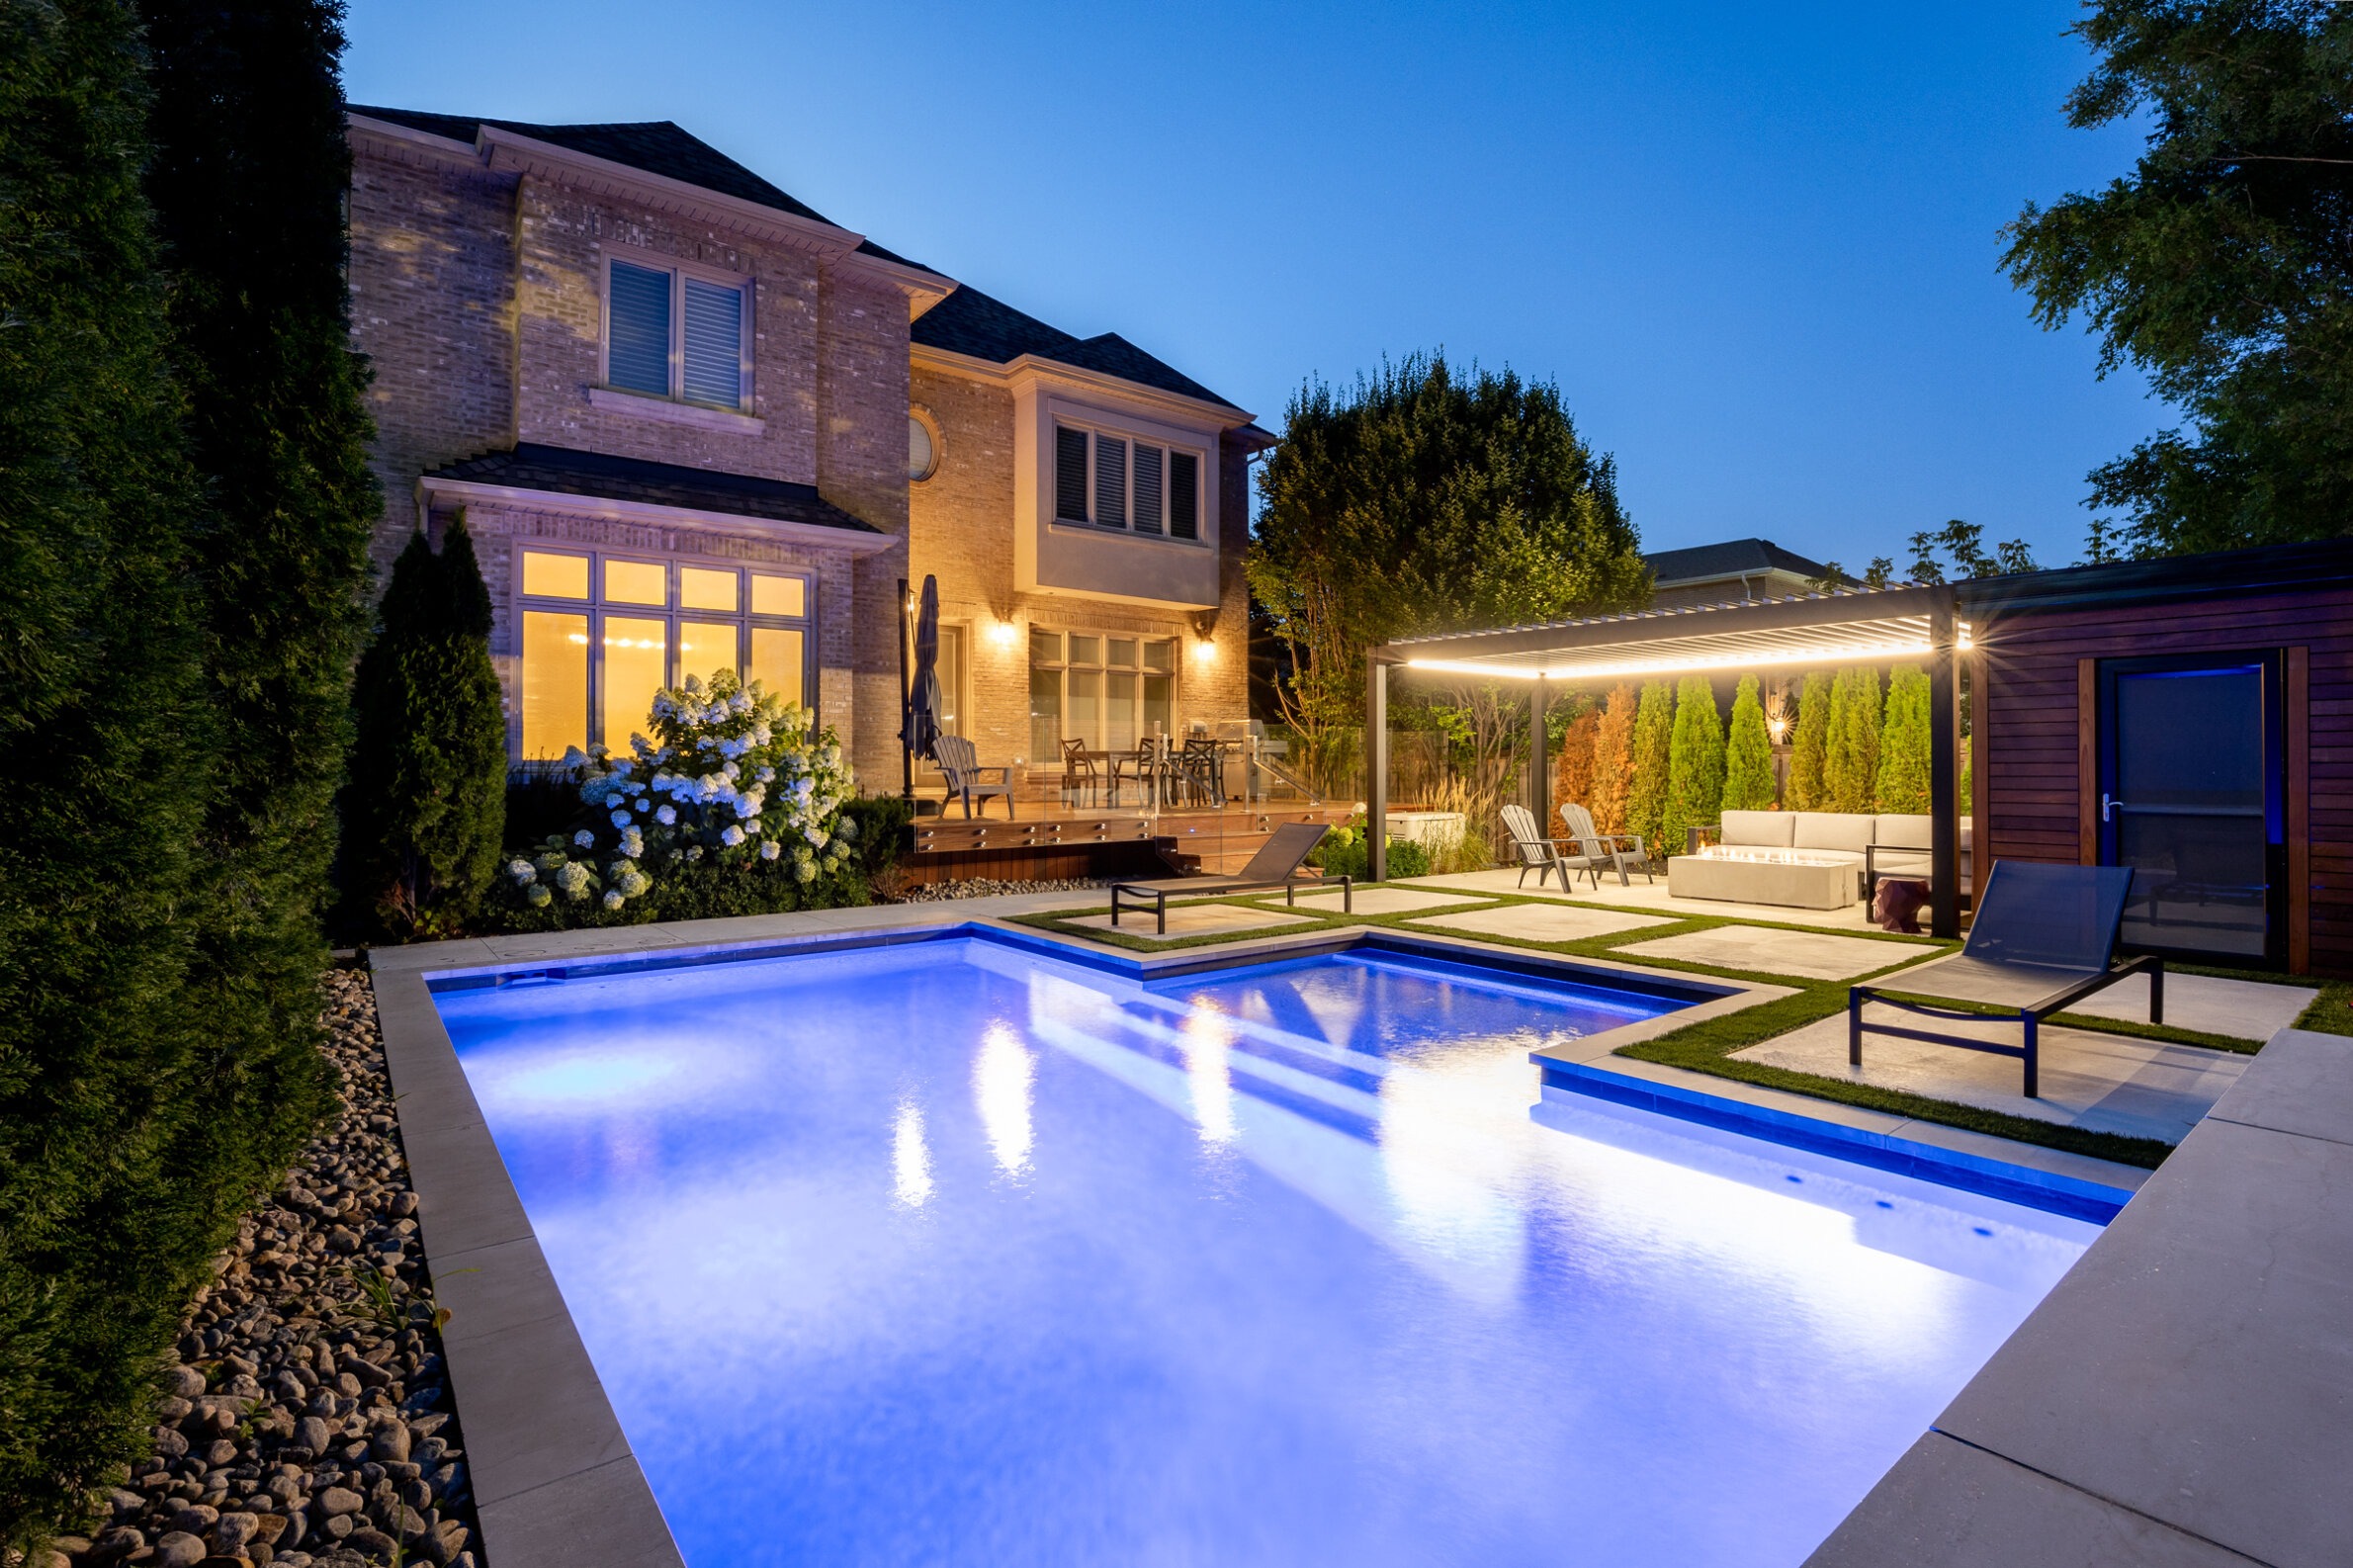 A luxurious backyard at twilight with an illuminated blue swimming pool, elegant furniture, landscaping, and a modern house with warm interior lights.